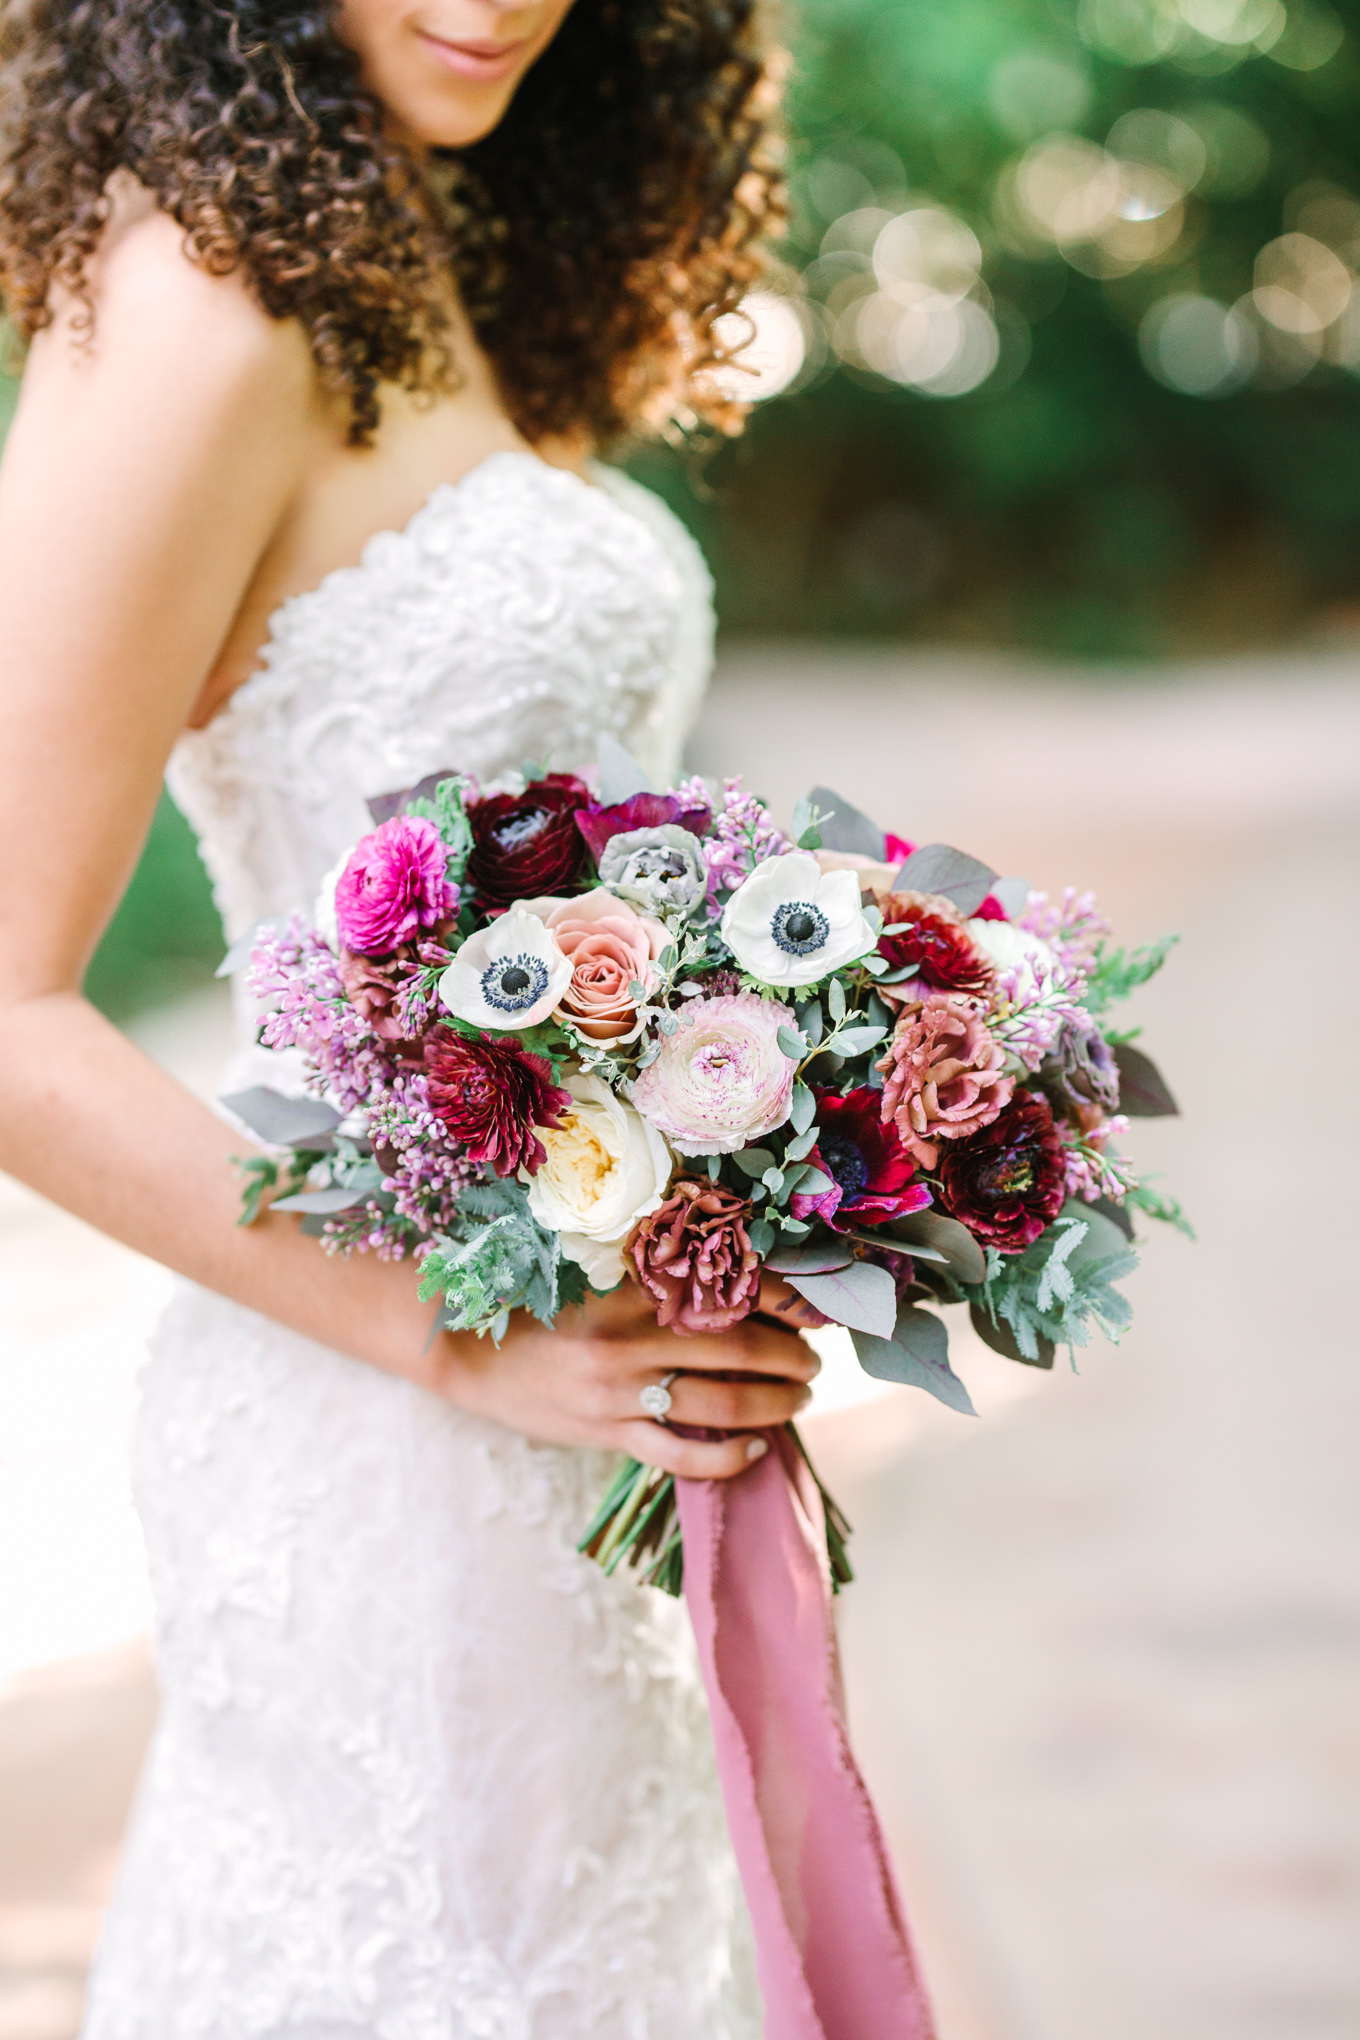 Purple and anemone wedding flowers | Beautiful bridal bouquet inspiration and advice | Colorful and elevated wedding photography for fun-loving couples in Southern California | #weddingflowers #weddingbouquet #bridebouquet #bouquetideas #uniquebouquet   Source: Mary Costa Photography | Los Angeles